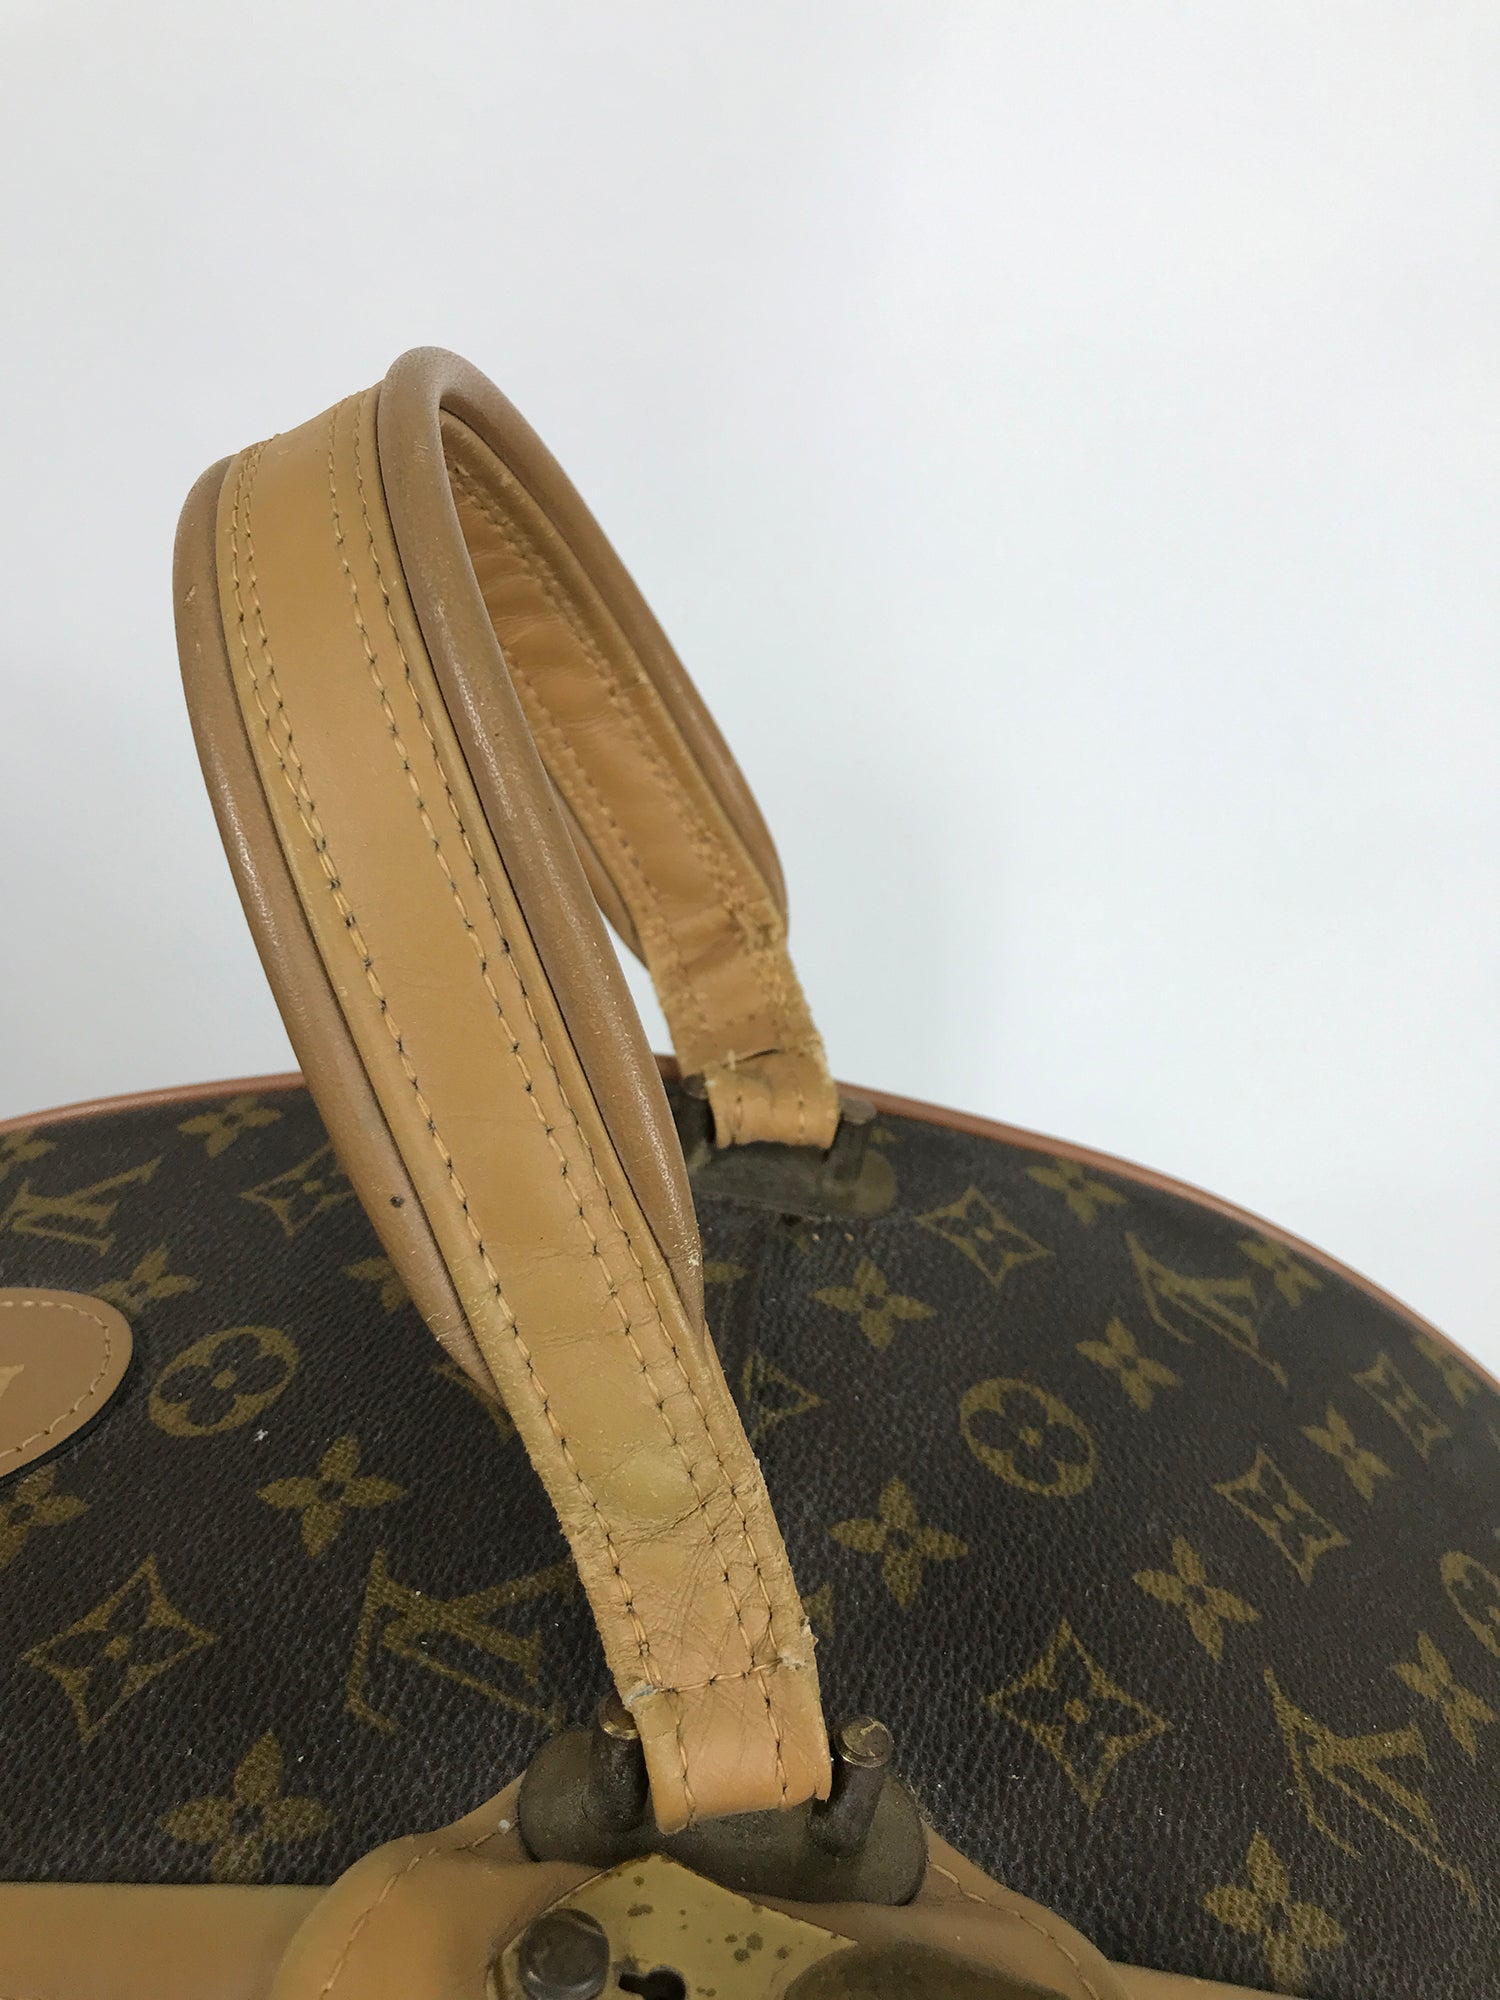 SOLD Louis Vuitton for The French Co. 50cm Boite Chapeaux Round